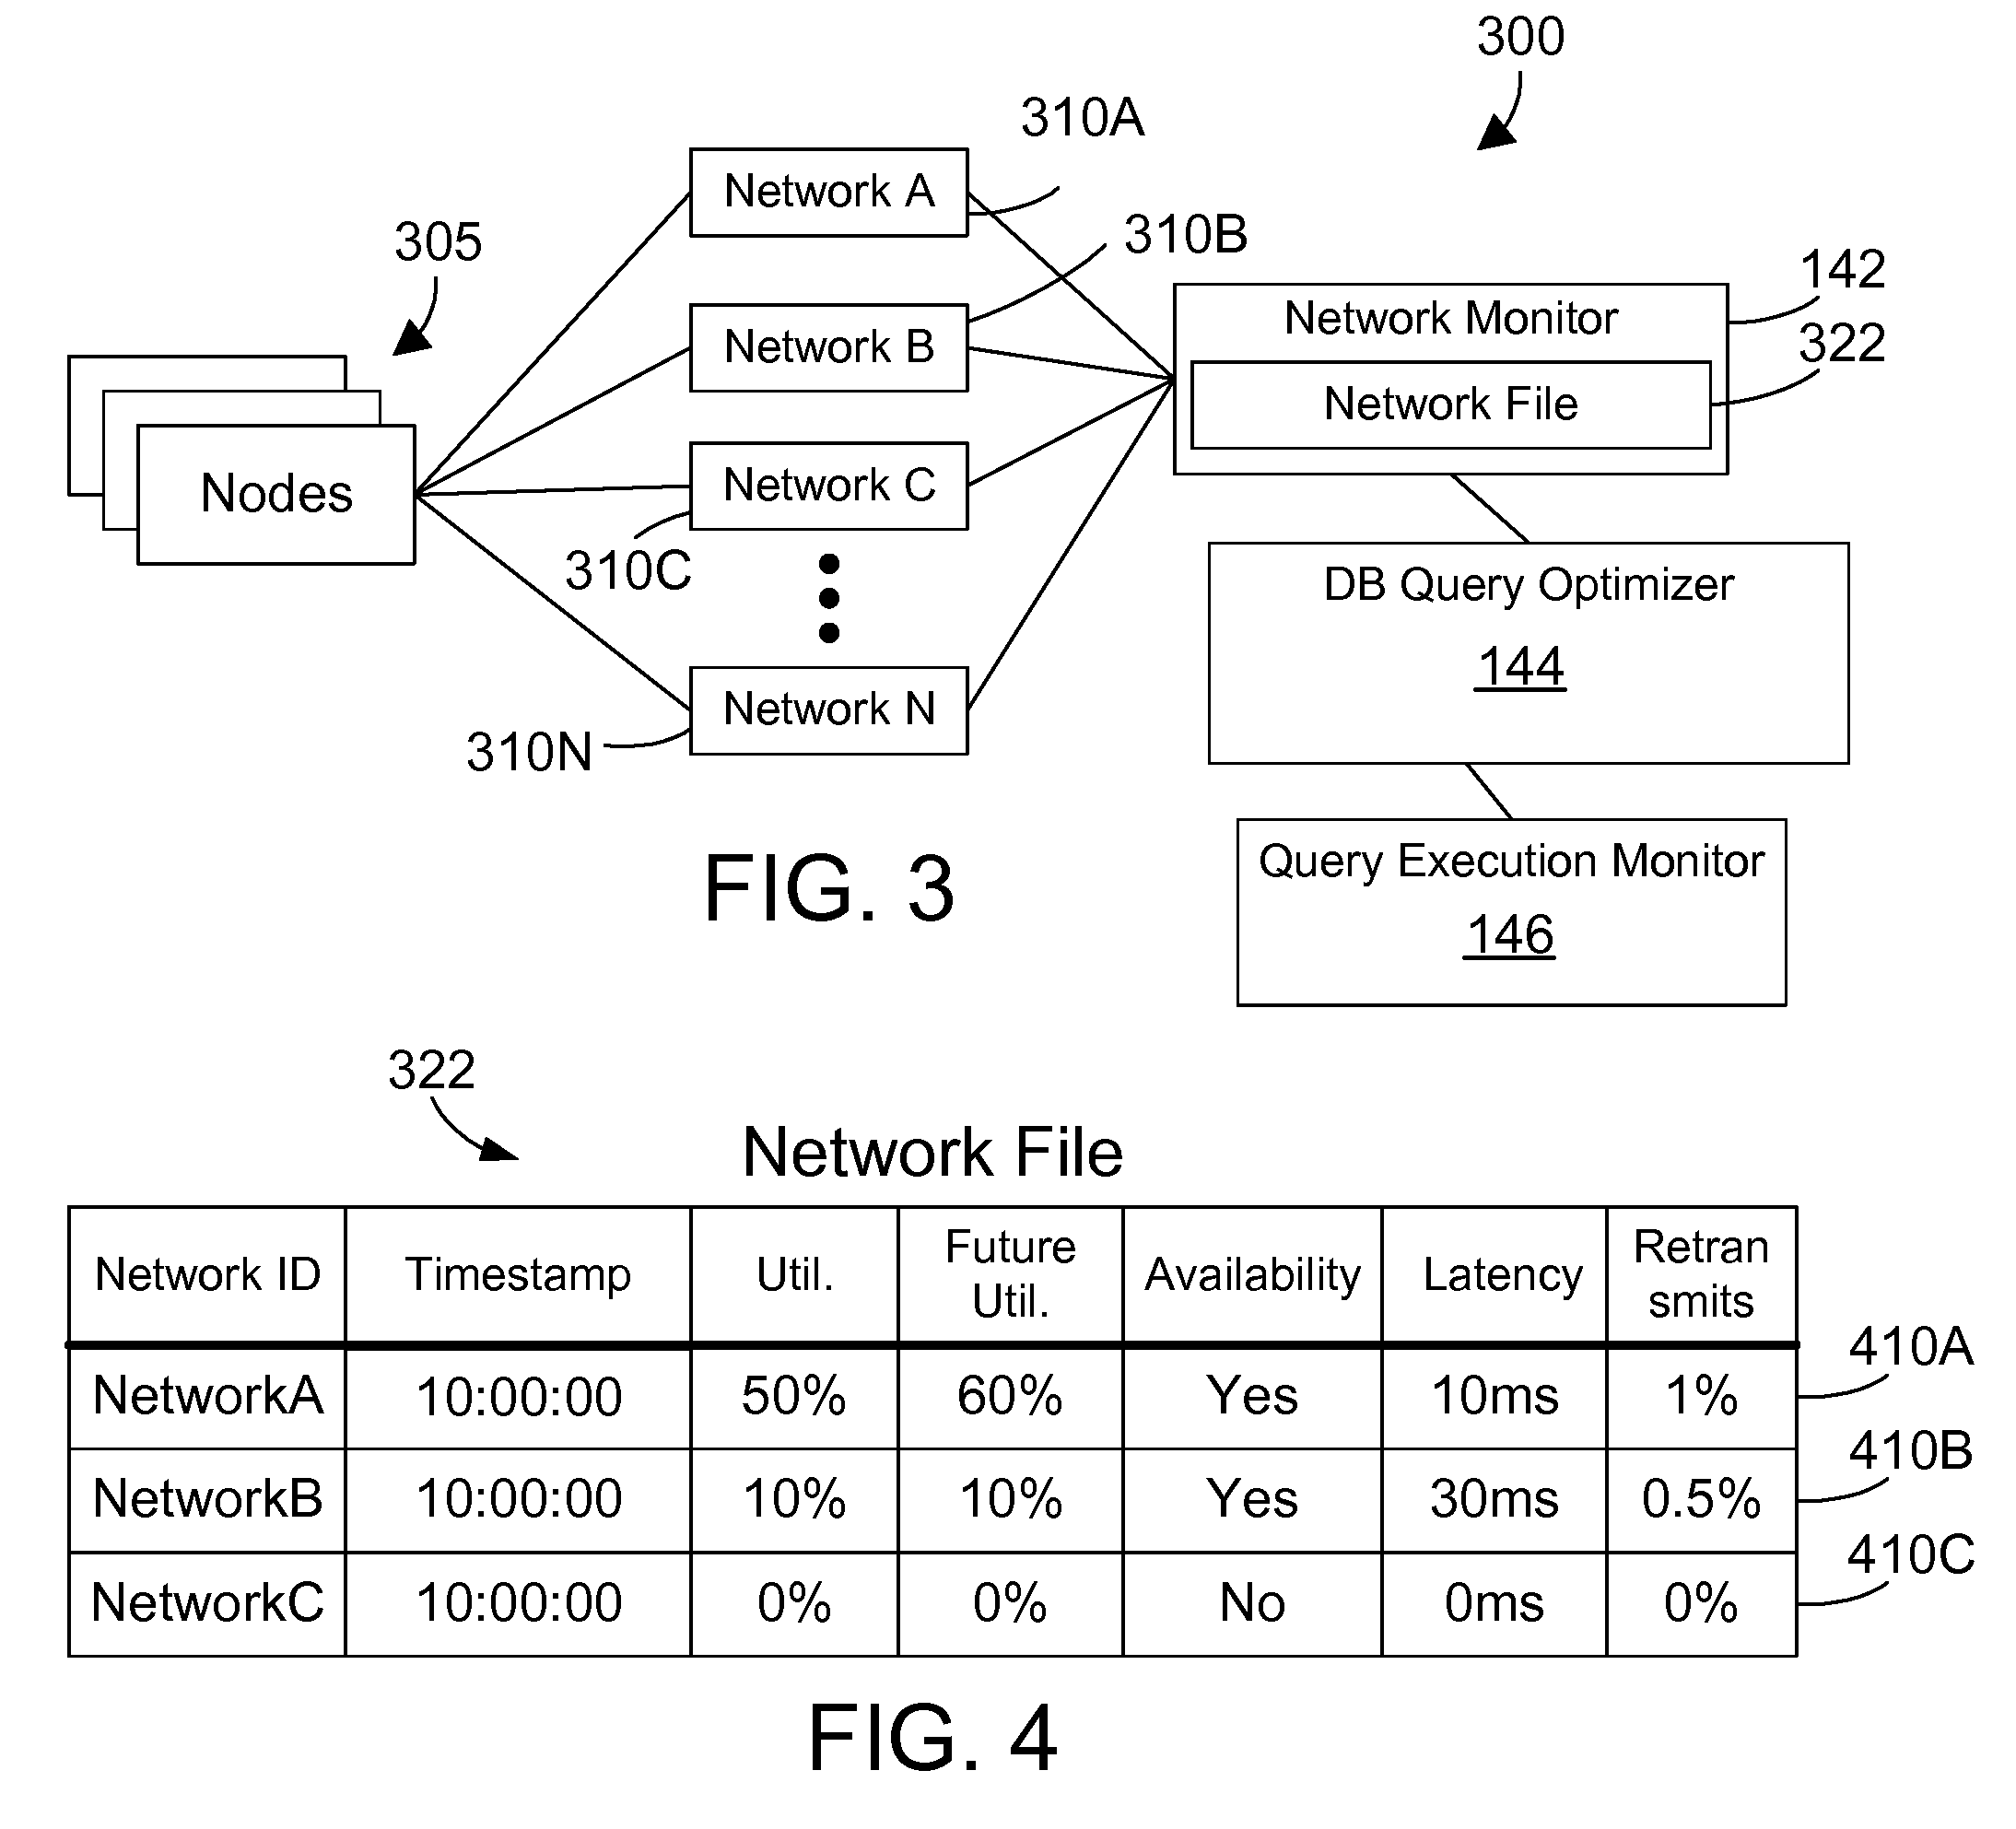 Query Execution and Optimization with Autonomic Error Recovery from Network Failures in a Parallel Computer System with Multiple Networks